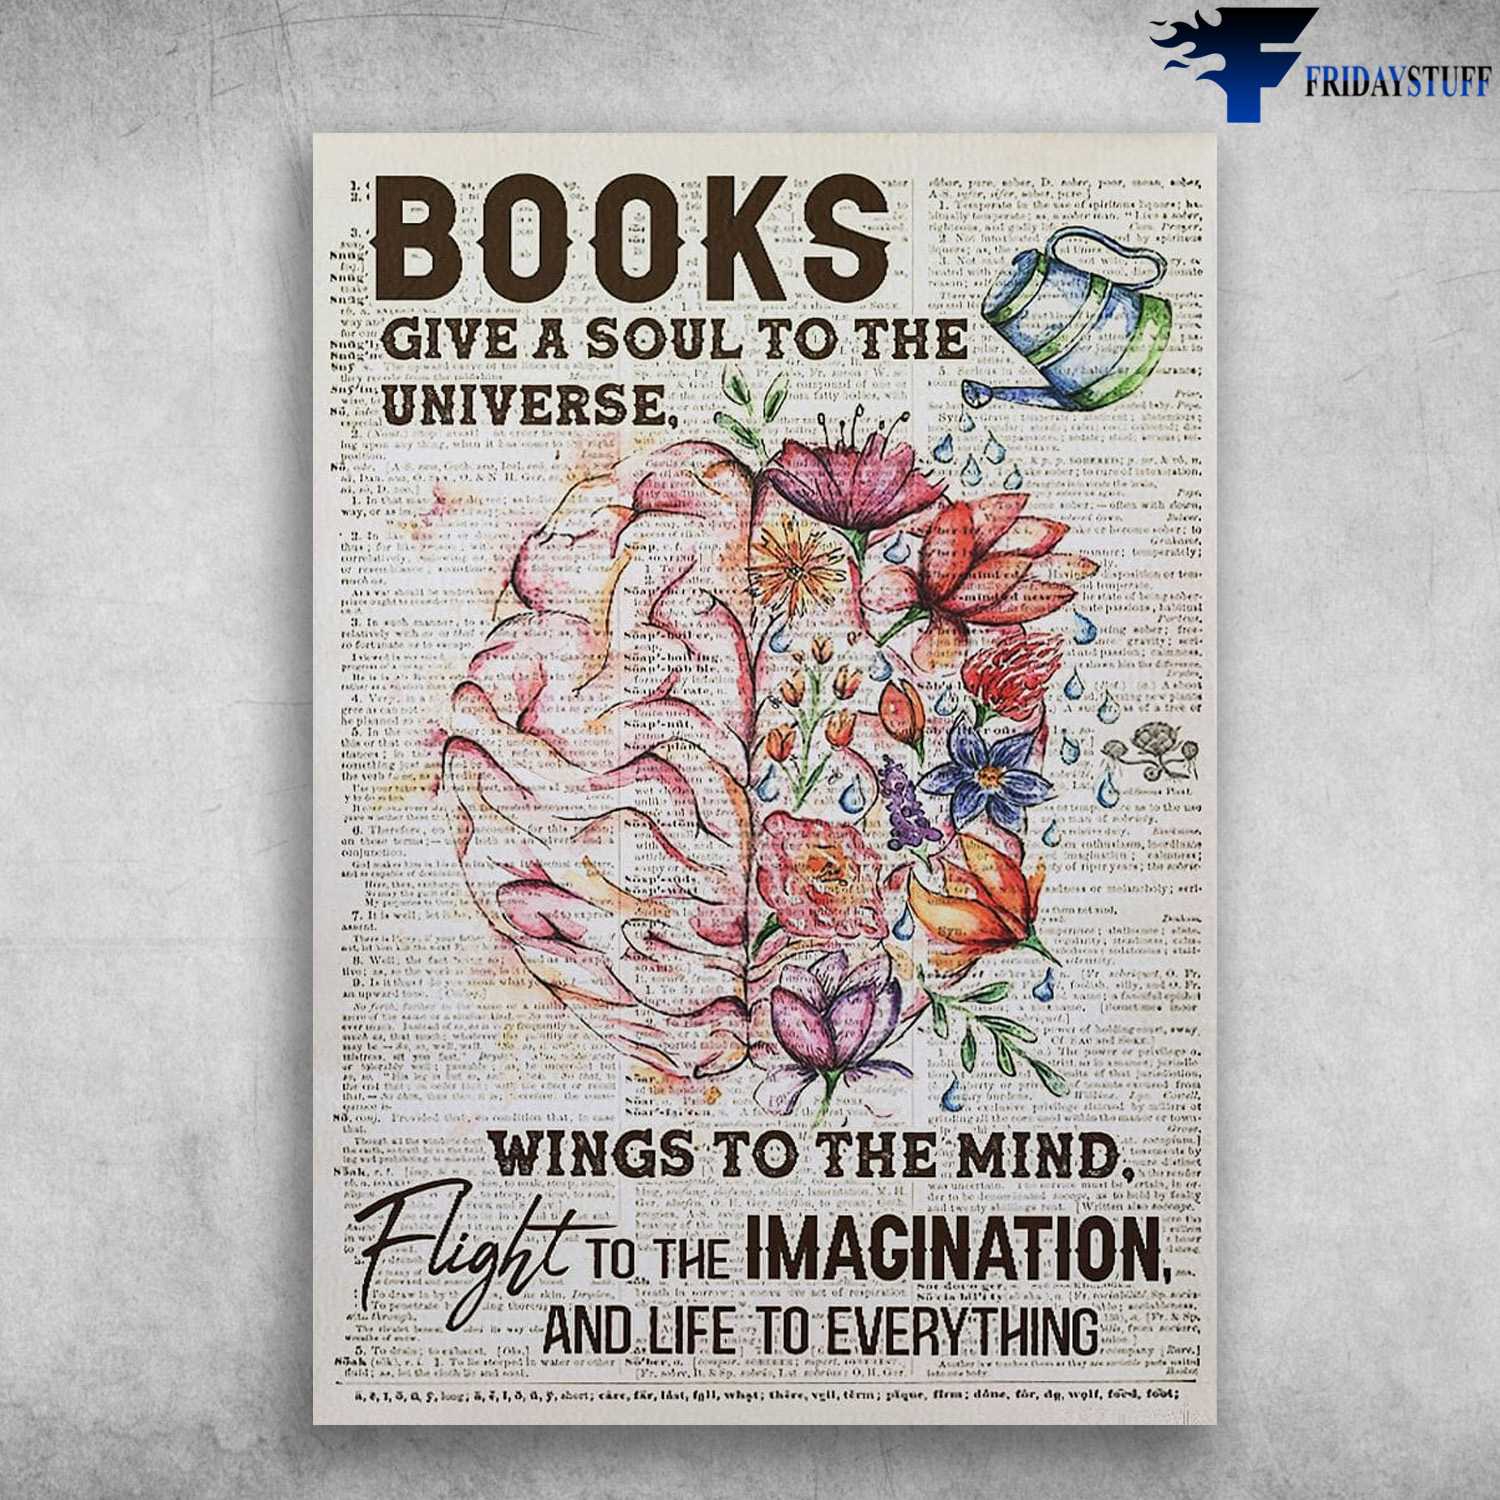 Book Lover, Gift For Reader, Books Give A Soul To The Universe, Wings To The Mind, Flight To The Imagination, And Life To Everything